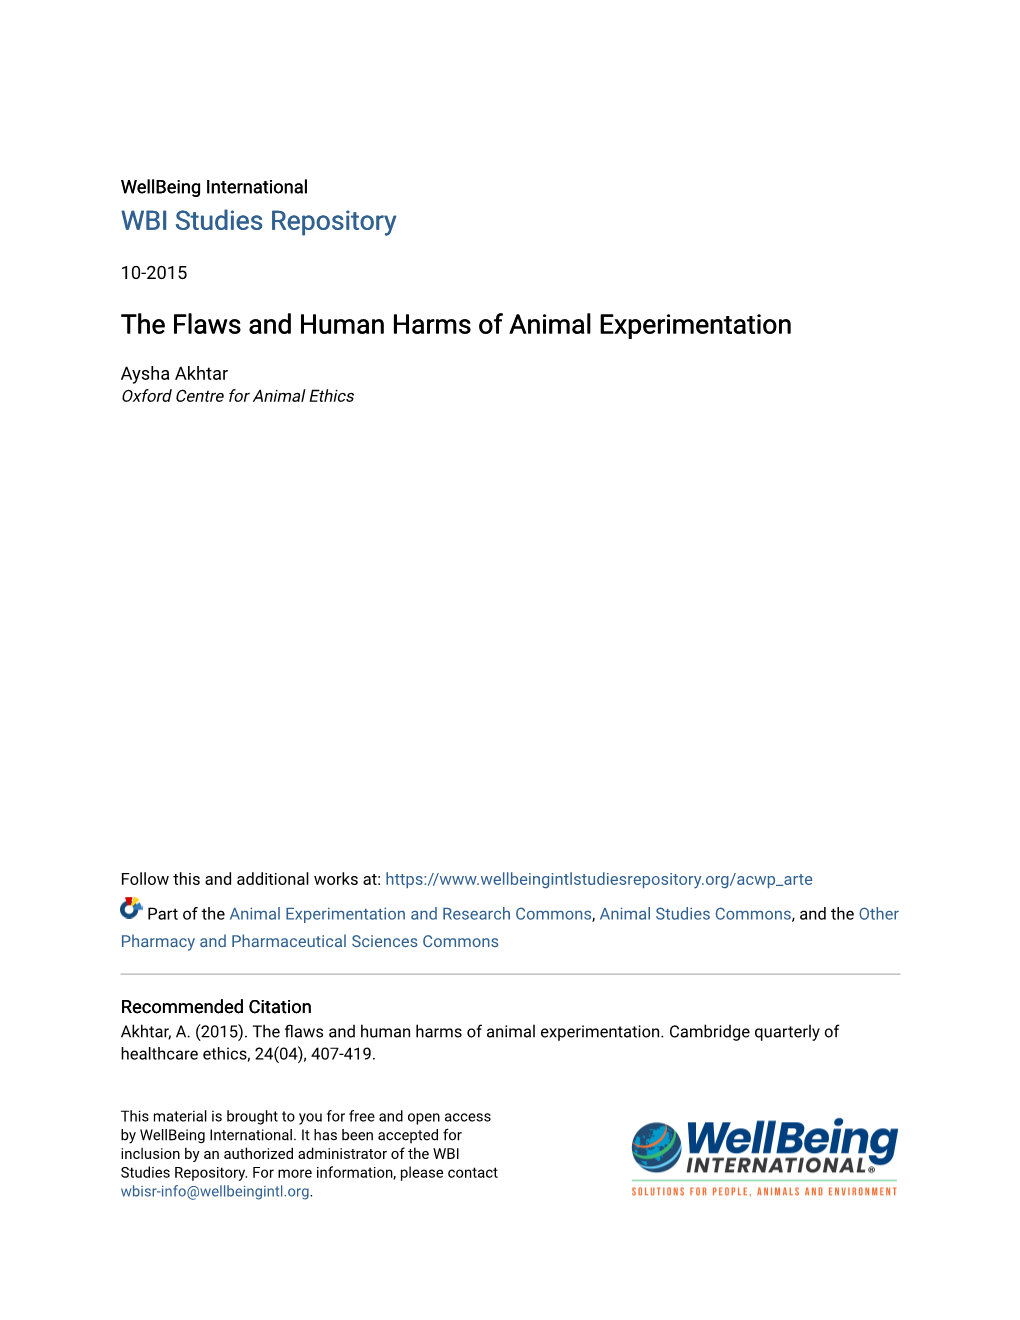 The Flaws and Human Harms of Animal Experimentation